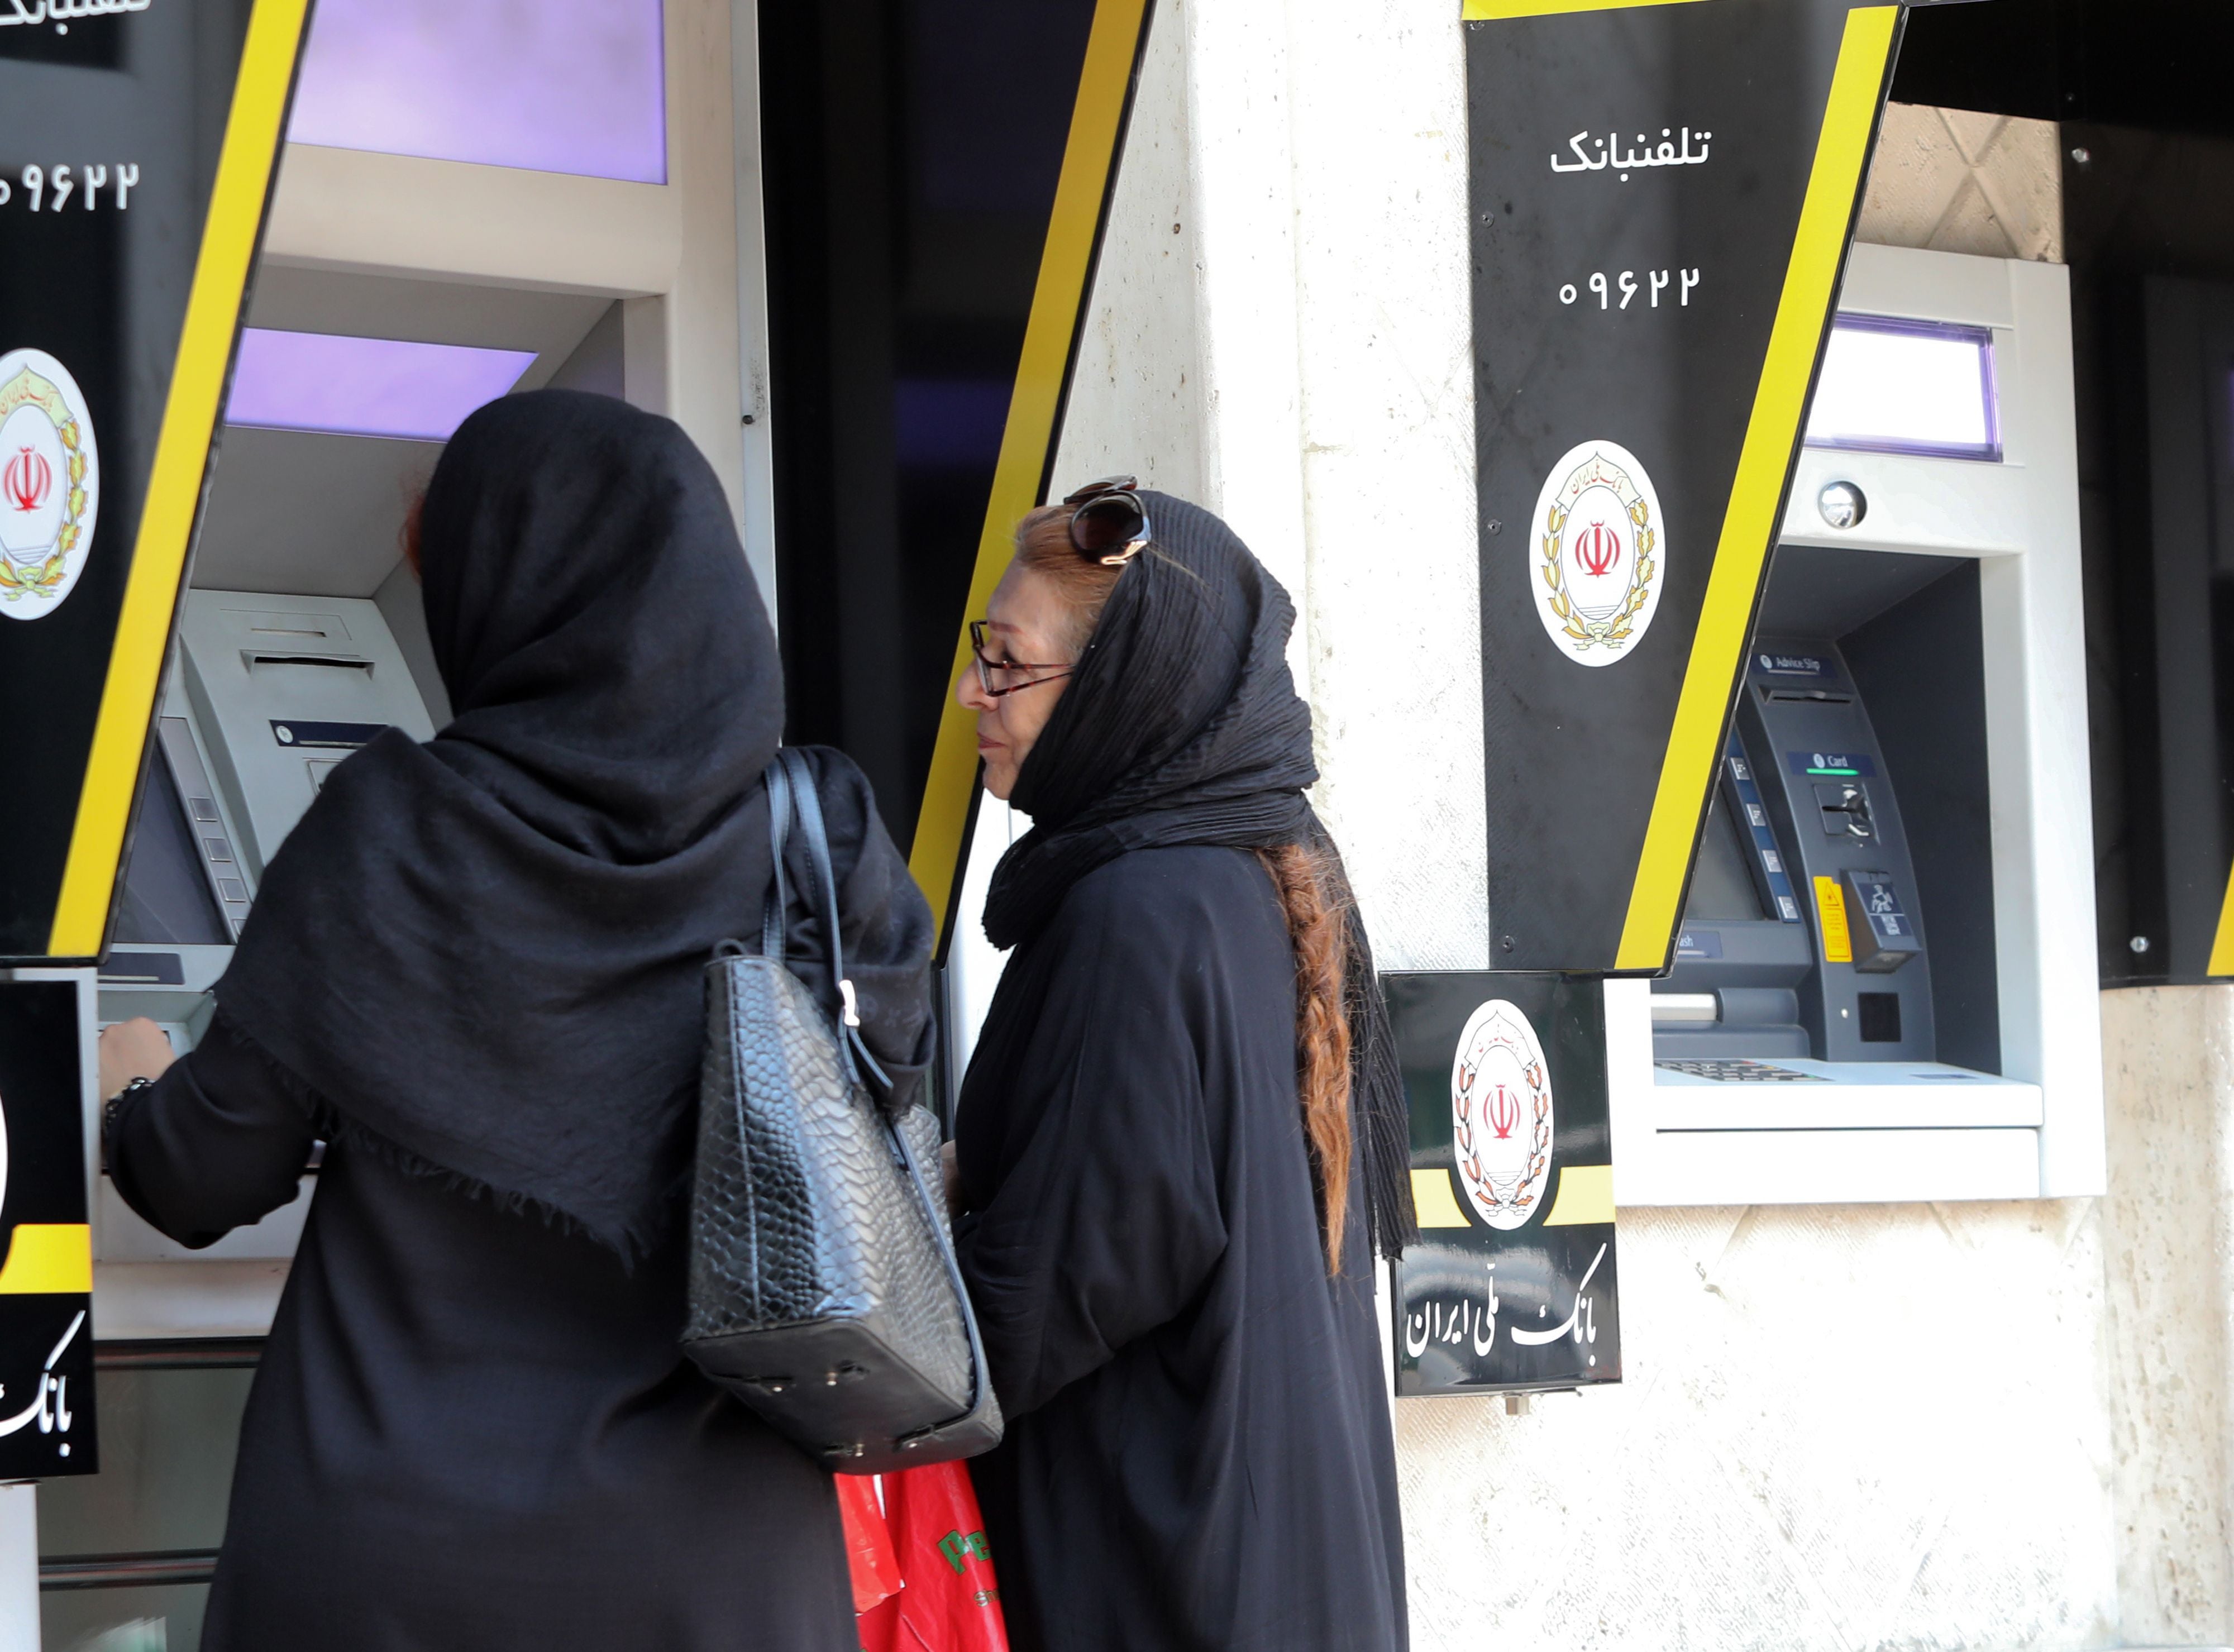 Iranian women use ATM machines in Tehran. US president Donald Trump’s administration has imposed sweeping sanctions on Iran’s banking sector, taking a major new step aimed at crippling its arch-rival’s economy weeks ahead of US elections